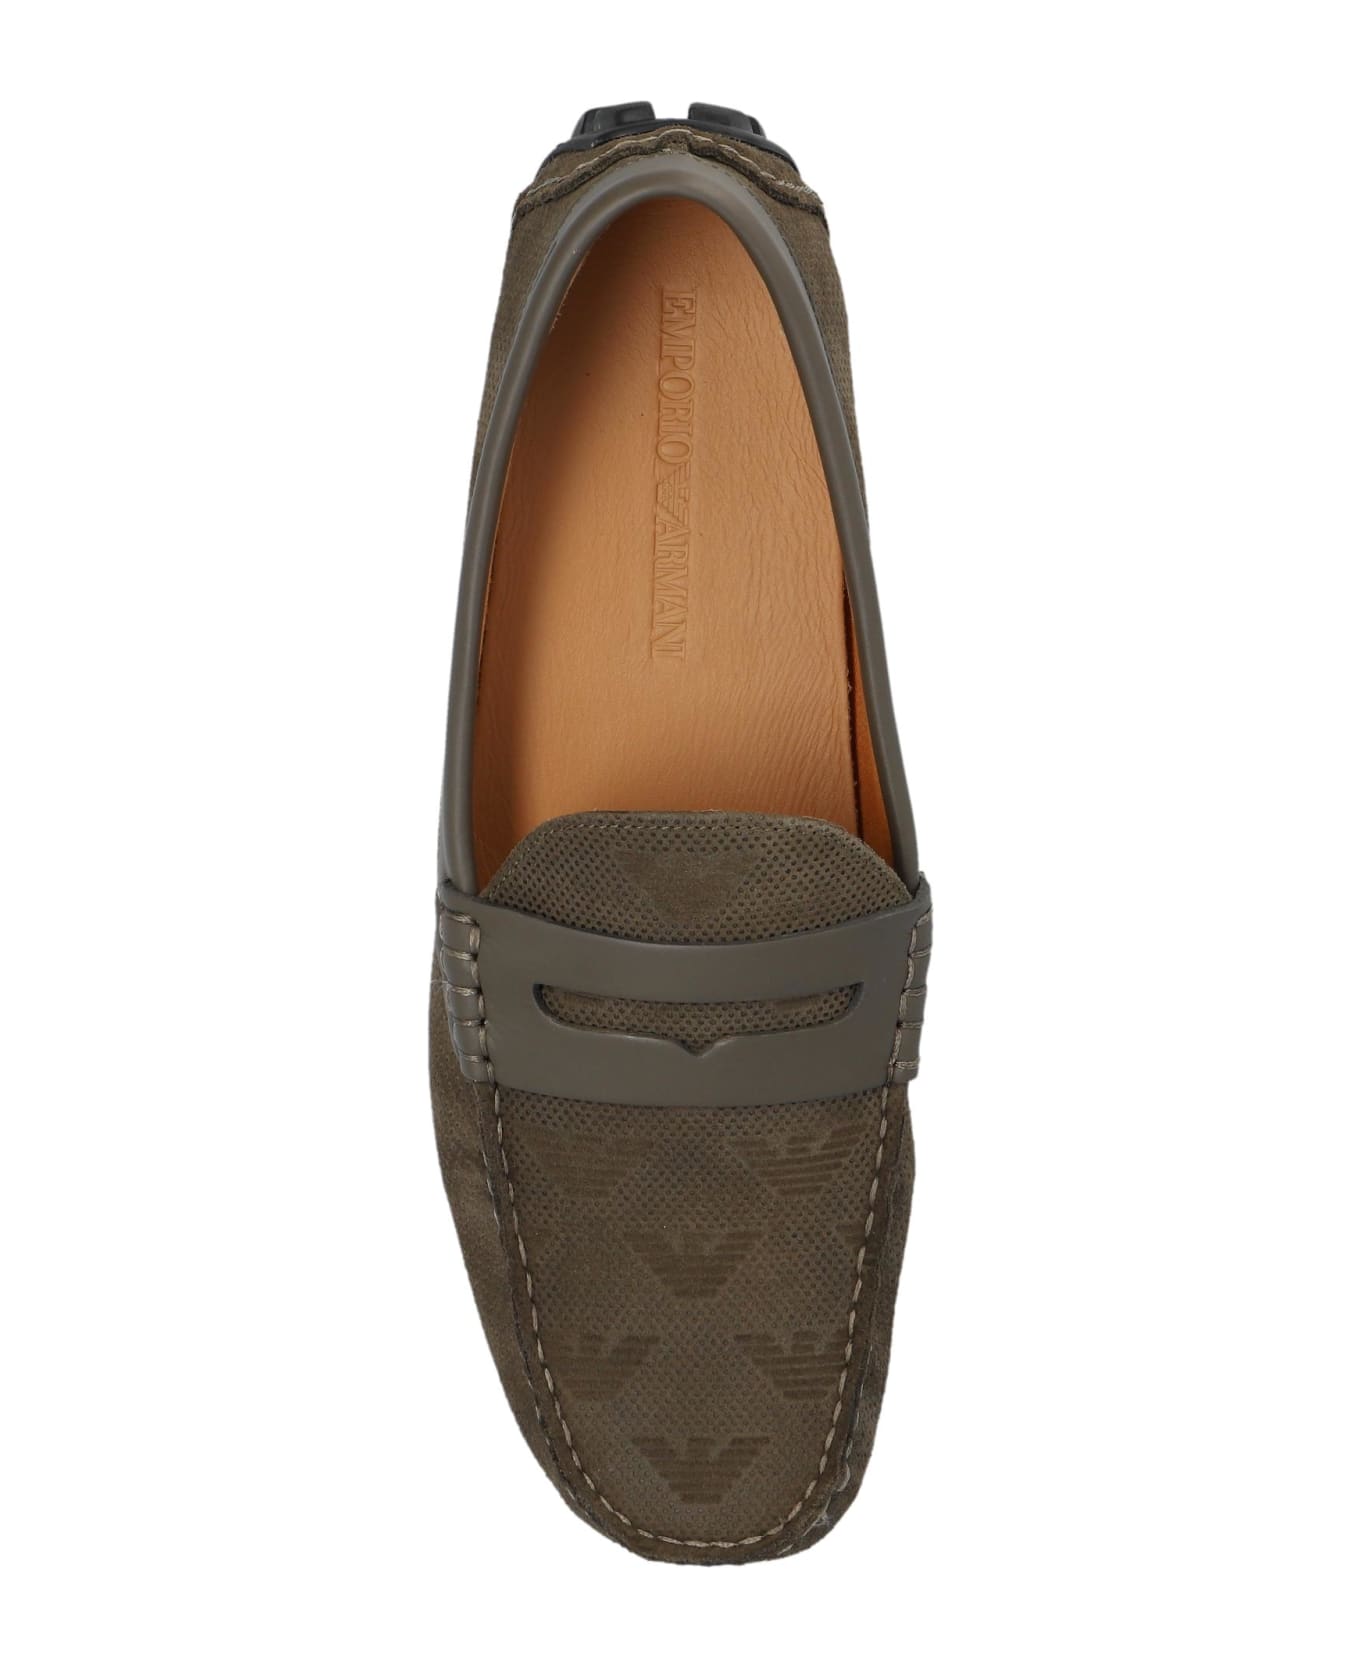 Emporio Armani Leather Loafers - Brown